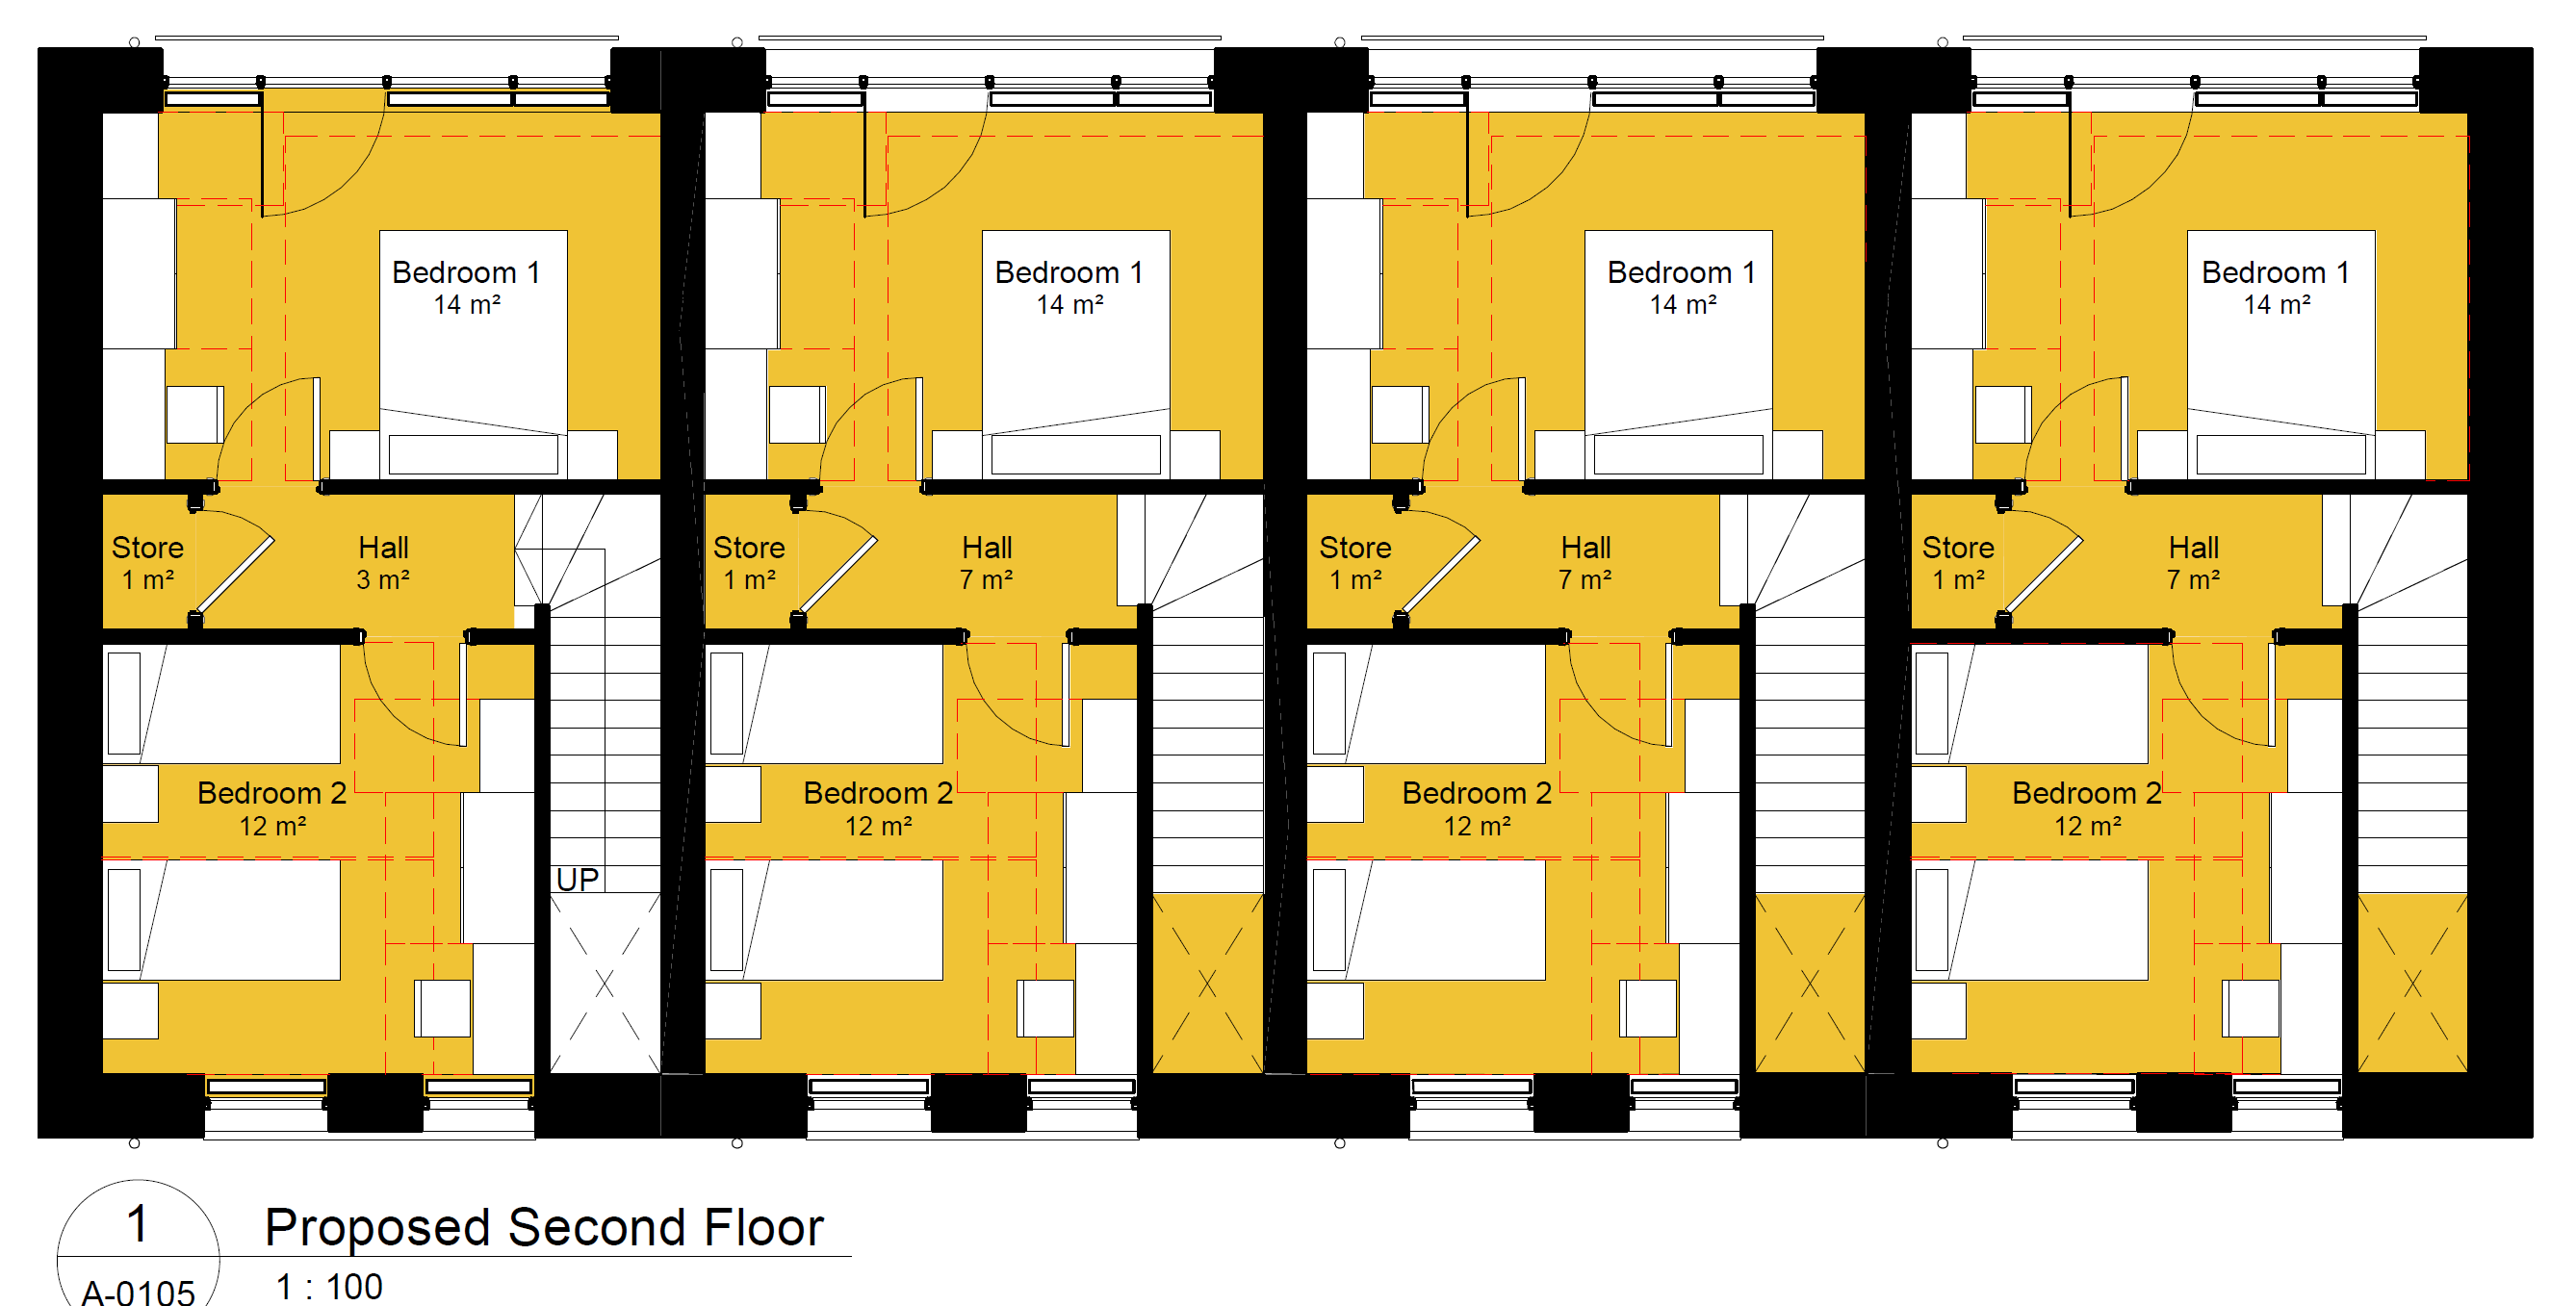 A second floor plan of the four homes, which are identical, with bedrooms at the front and rear and storage between. 